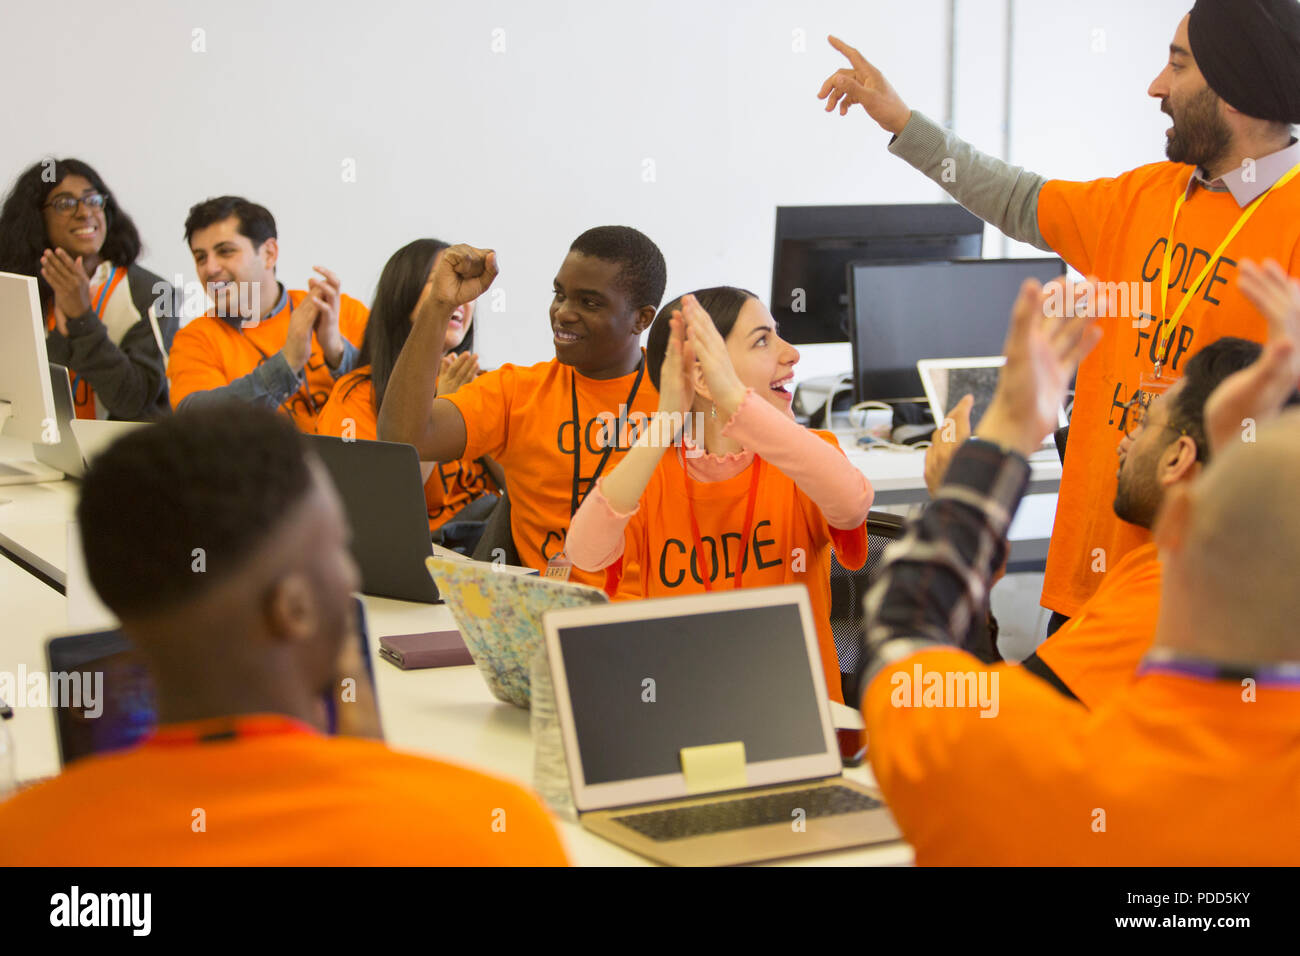 Happy hackers cheering and celebrating, coding for charity at hackathon Stock Photo